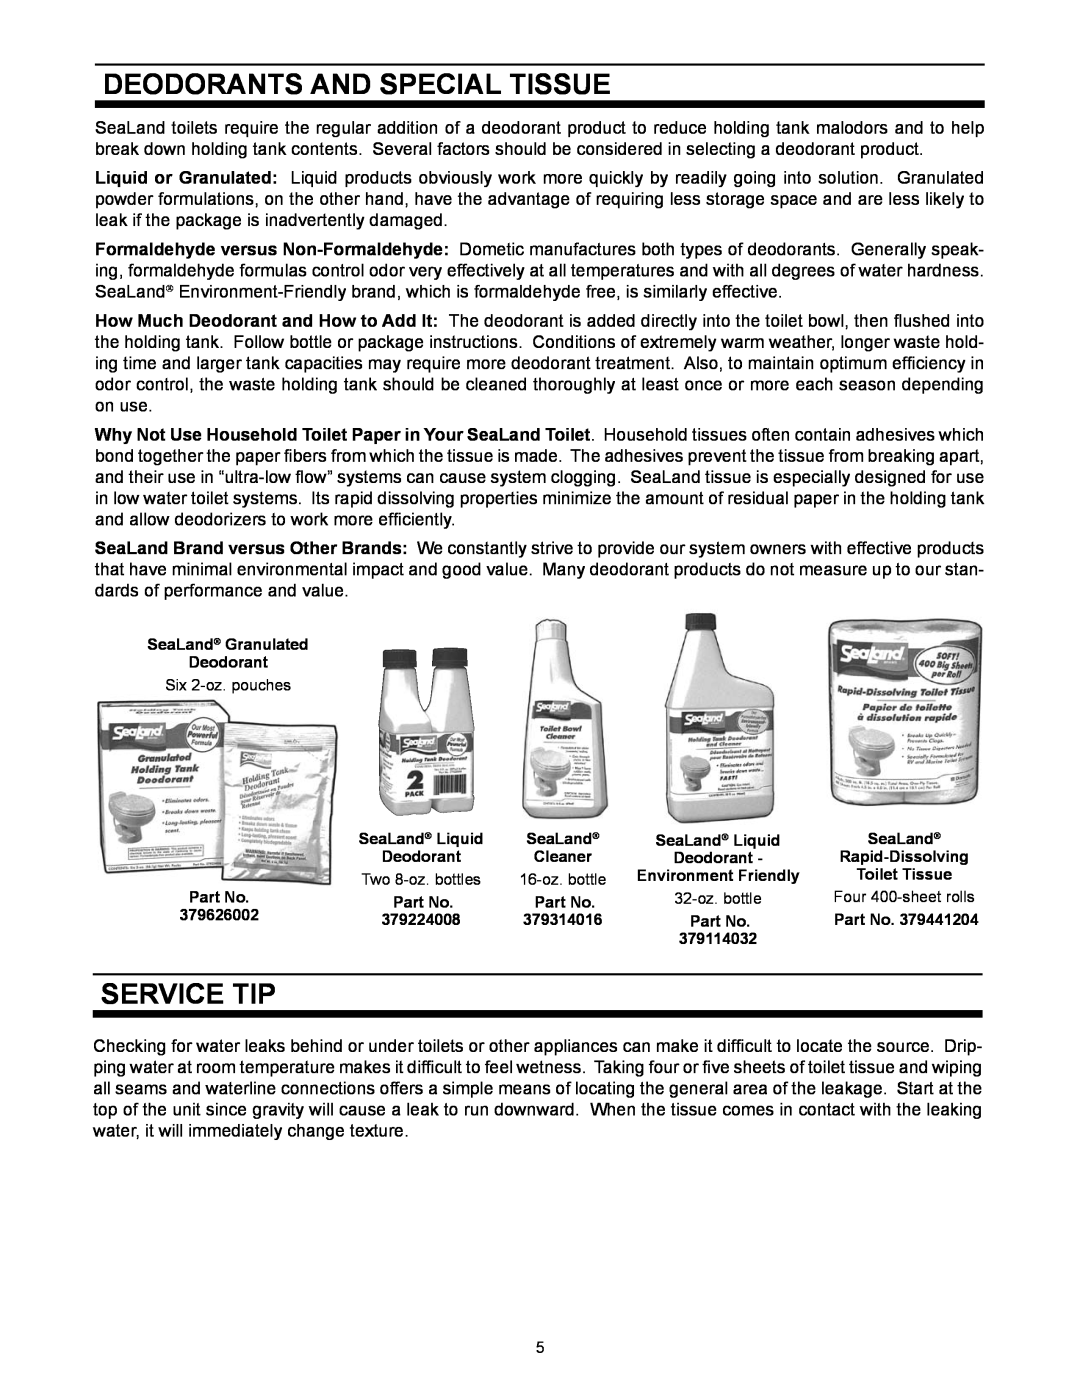 SeaLand 111 owner manual Deodorants and Special Tissue, Service Tip 